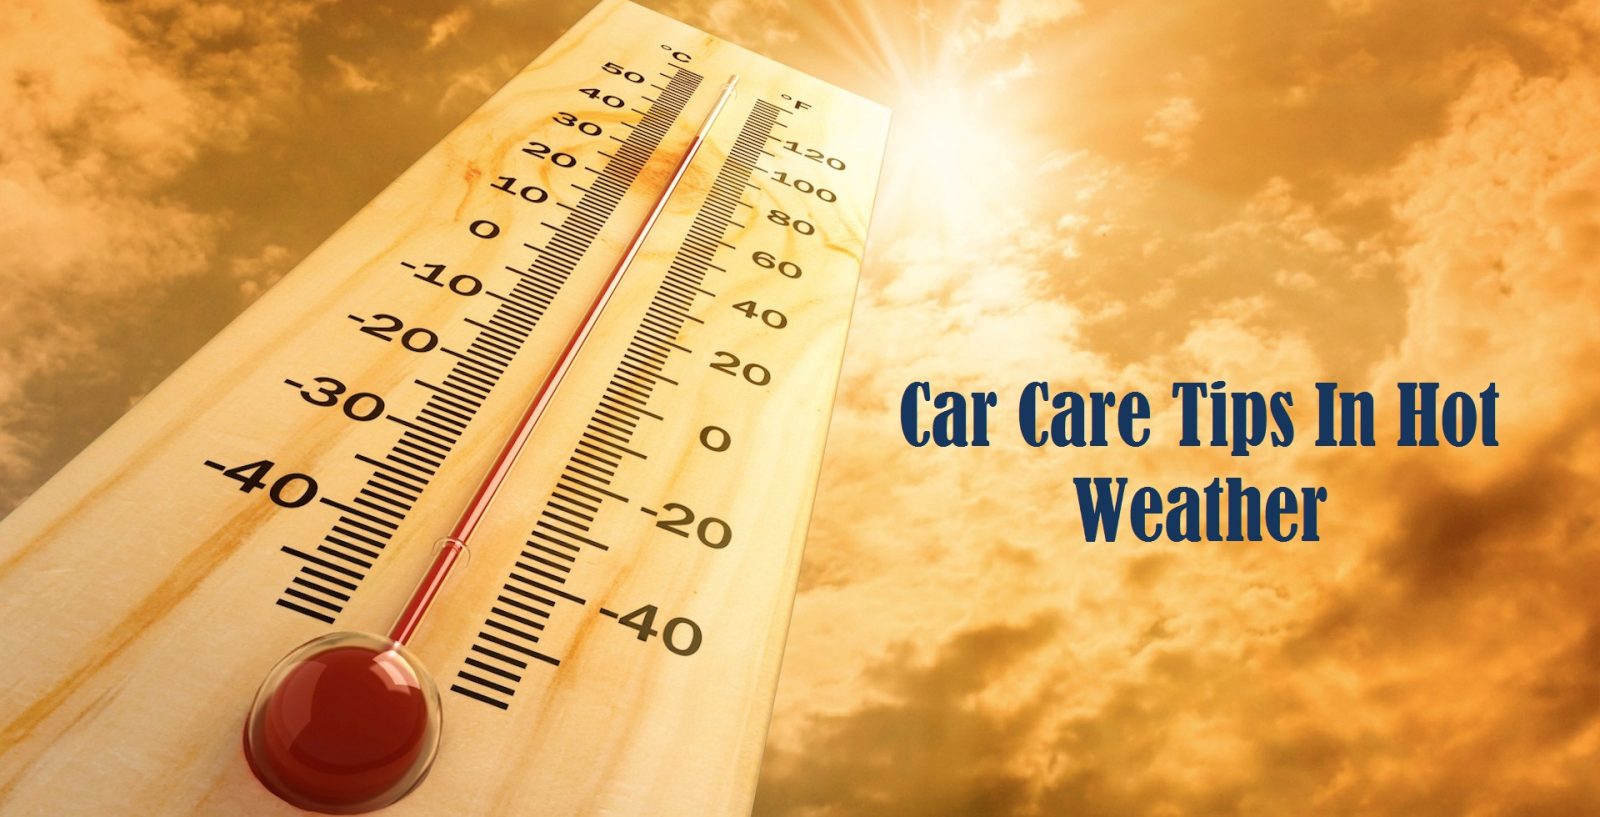 Car Care Tips In Hot Weather